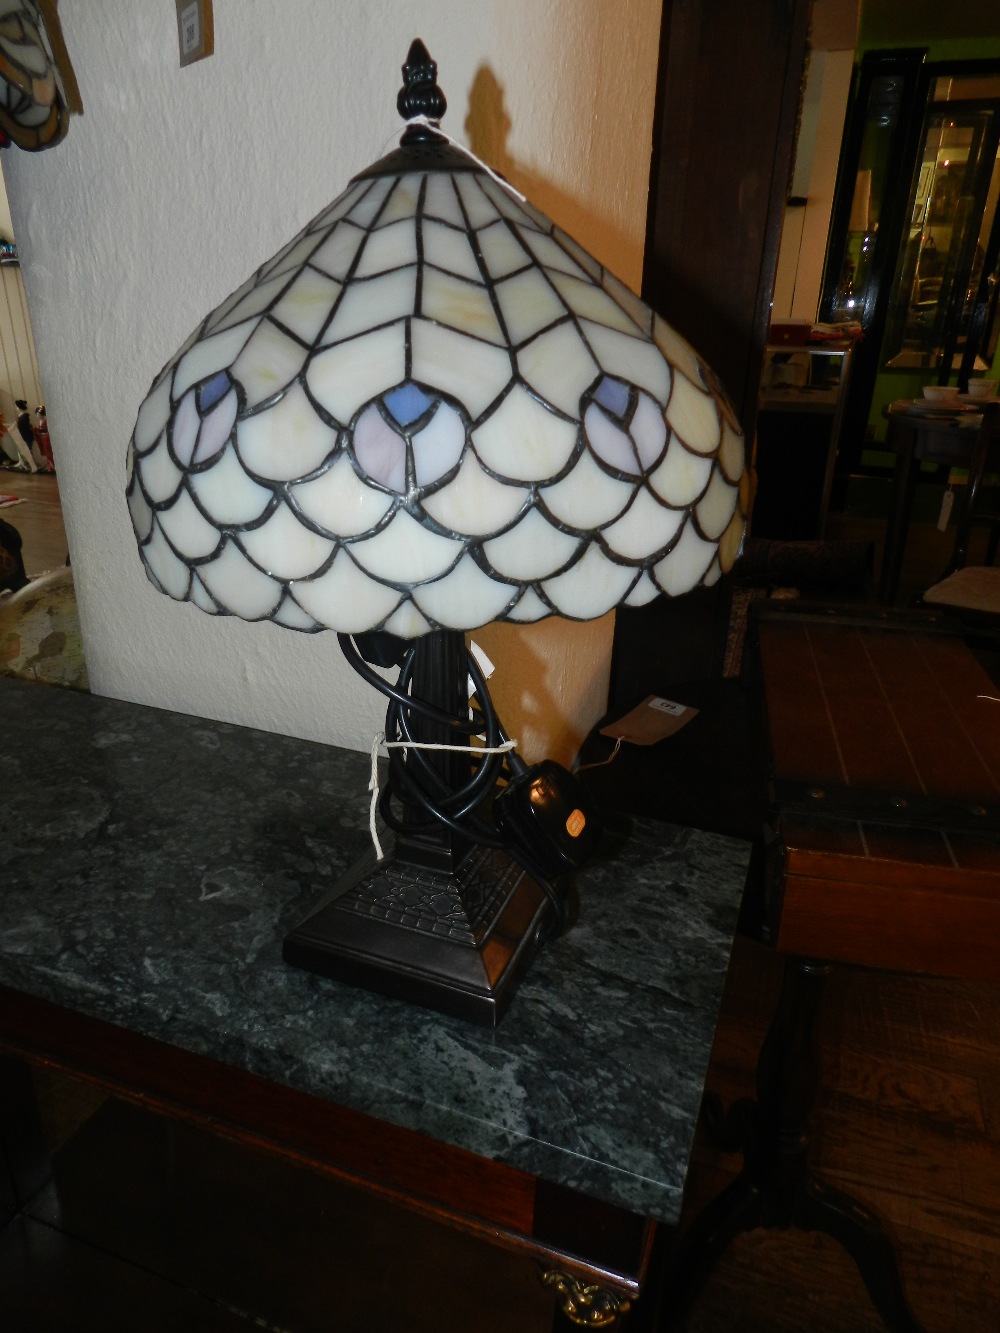 A Tiffany style lamp base with leaded glass shade of peacock feather design